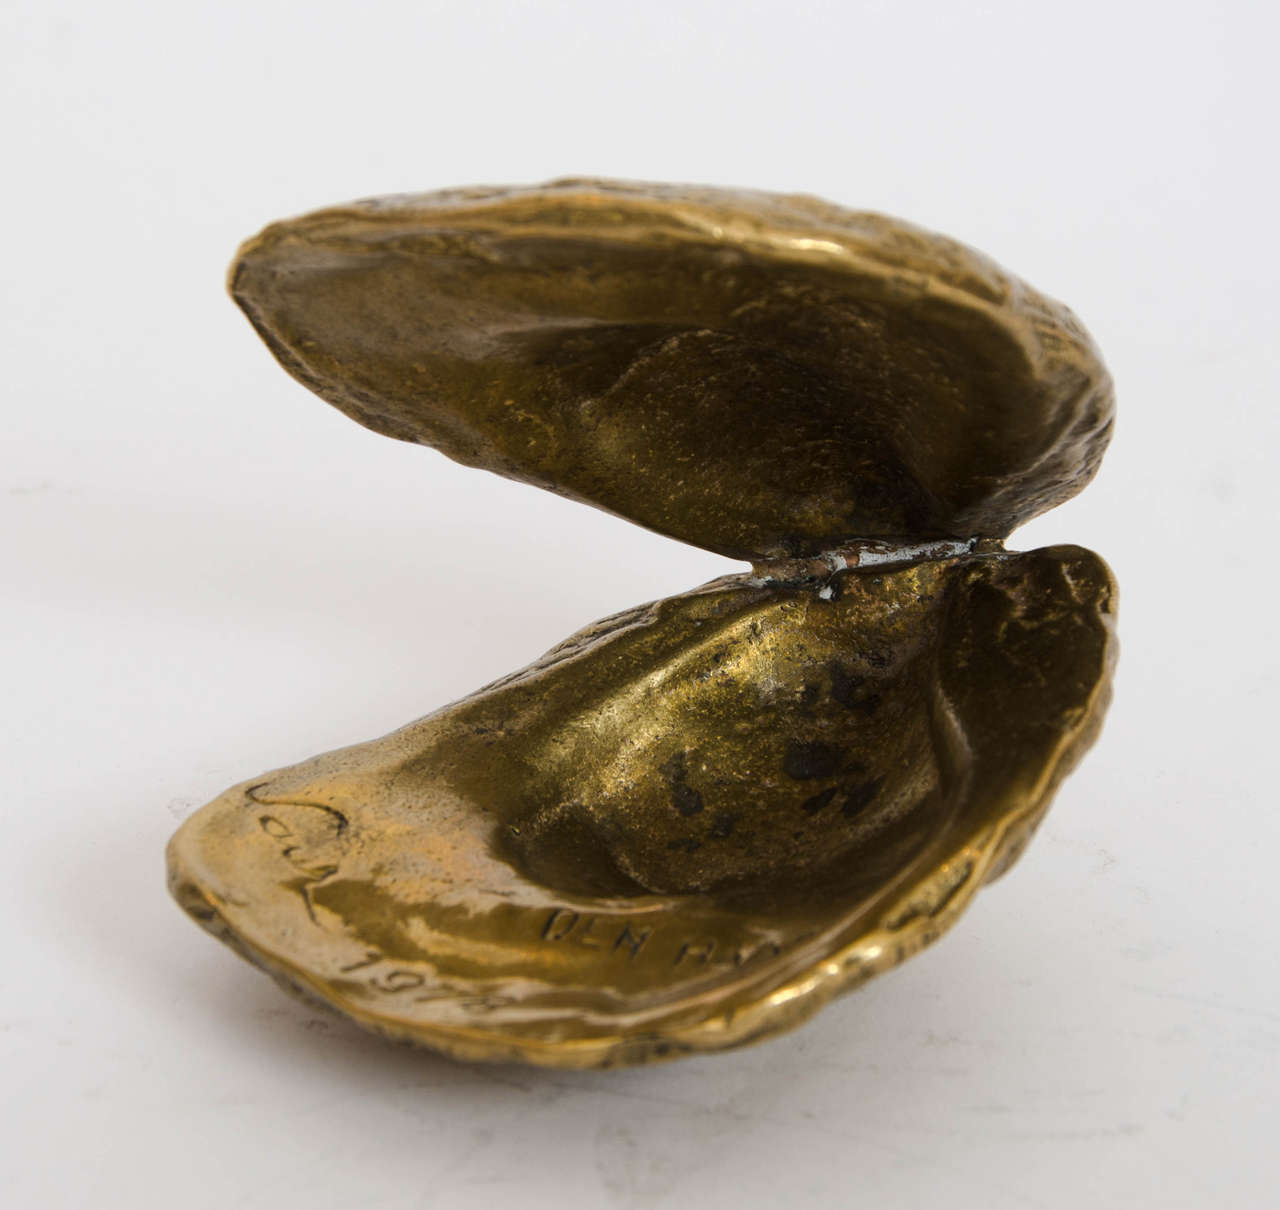 Bronze cast oyster open shell shaped dish signed Saur Den Haag 1978.
Saur was a restaurant located in The Hague in the Netherlands. It was a fine dining restaurant that was awarded a Michelin star.